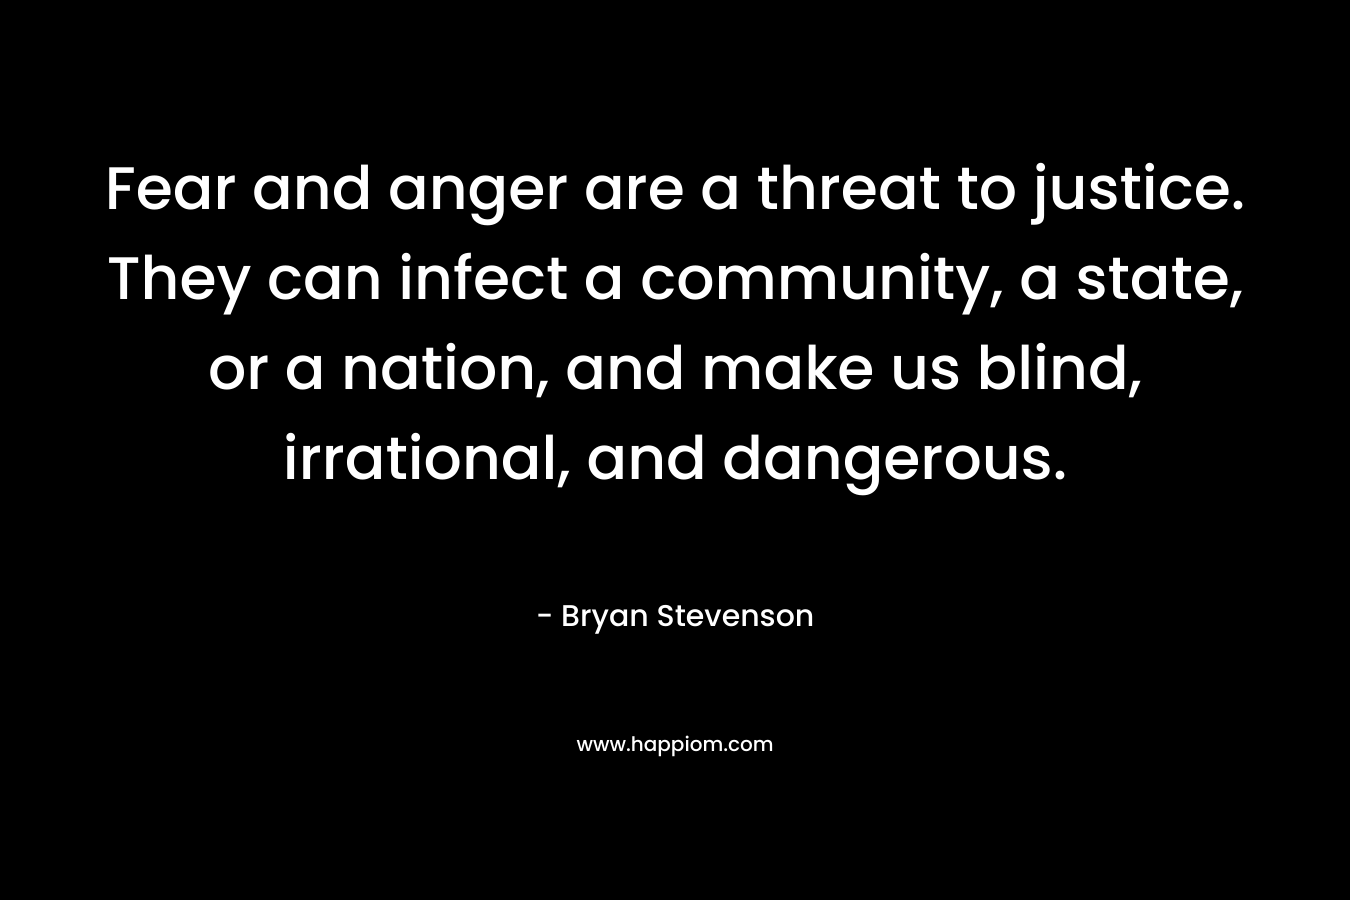 Fear and anger are a threat to justice. They can infect a community, a state, or a nation, and make us blind, irrational, and dangerous. – Bryan Stevenson